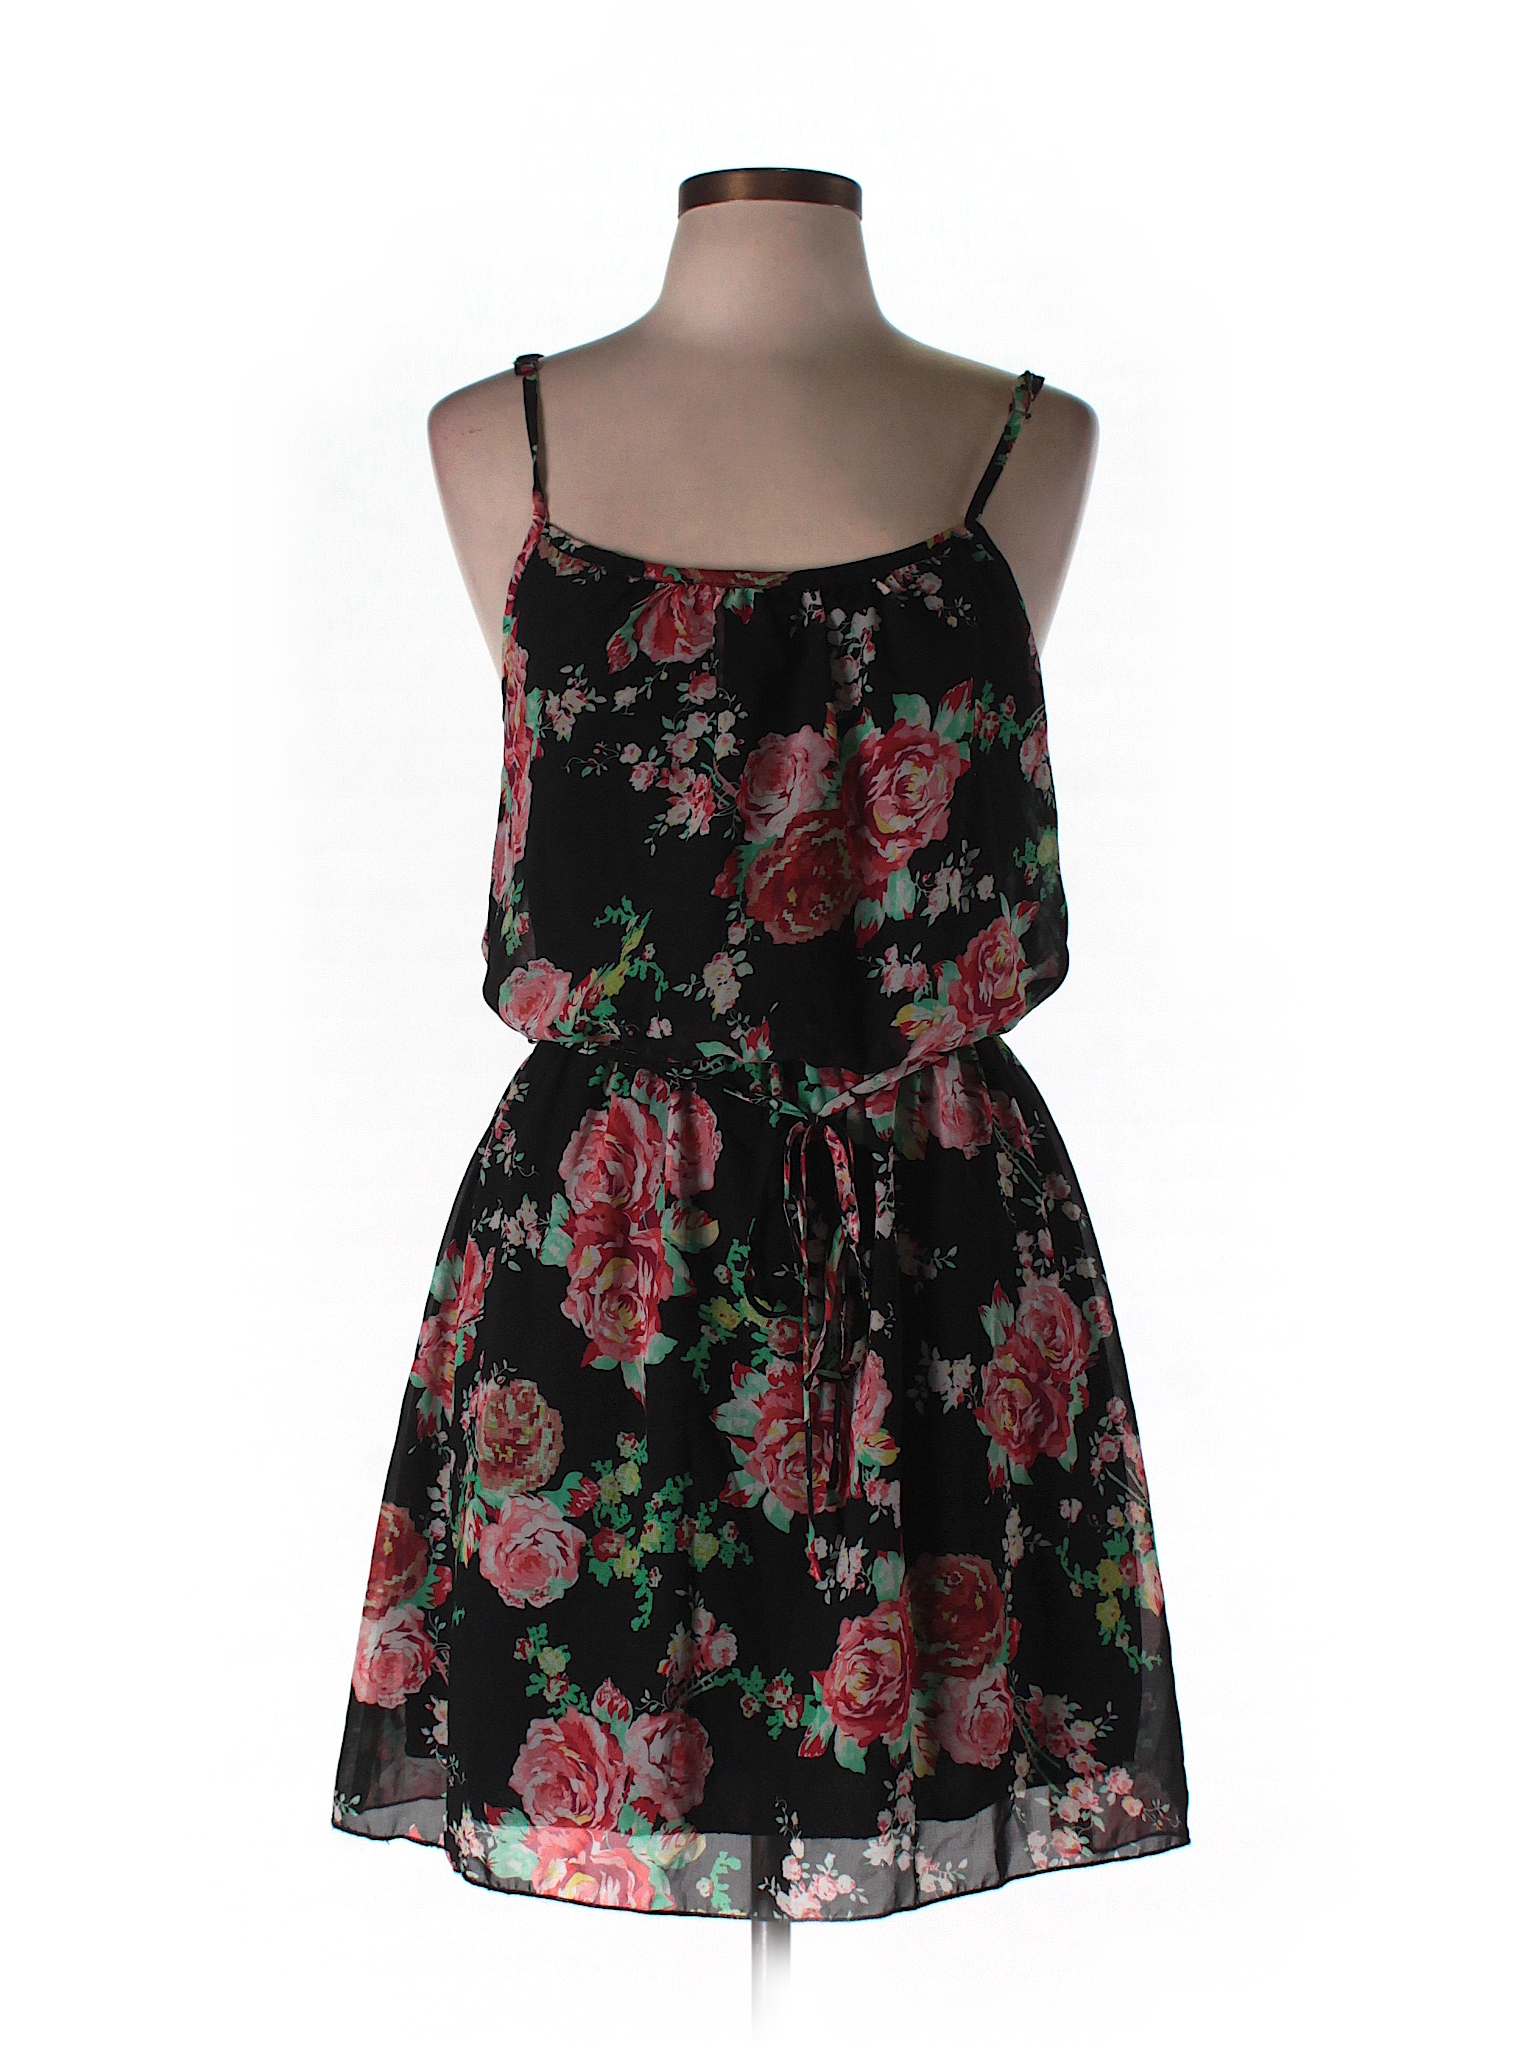 Poetry Clothing 100% Polyester Floral Black Casual Dress Size L - 75% ...